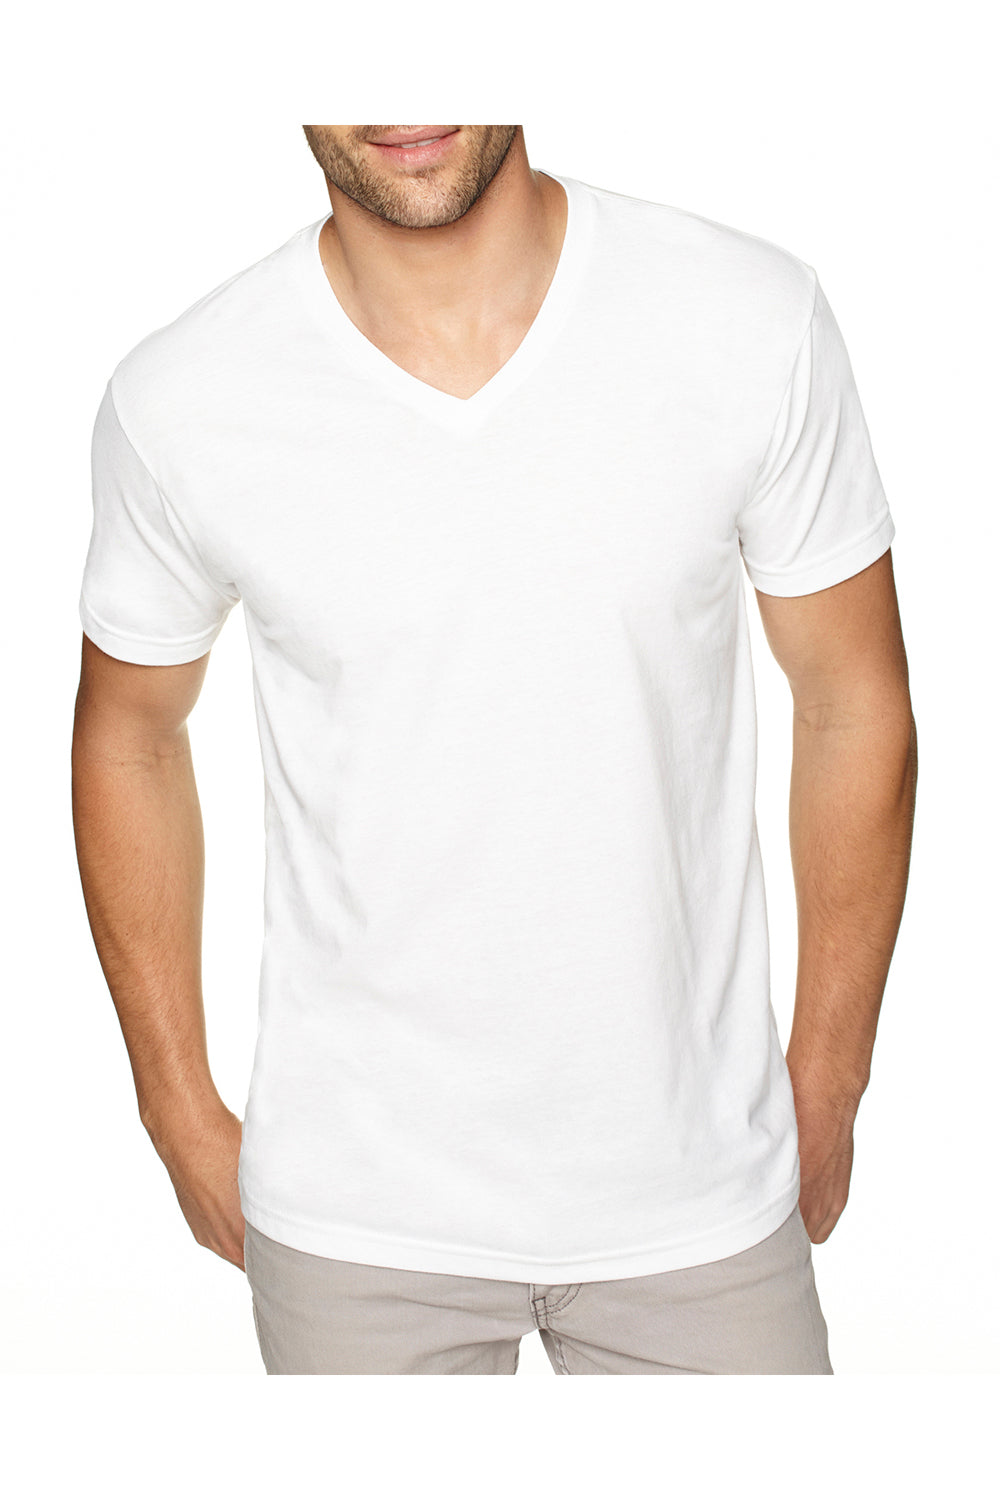 Next Level 6440 Mens Sueded Jersey Short Sleeve V-Neck T-Shirt White Front